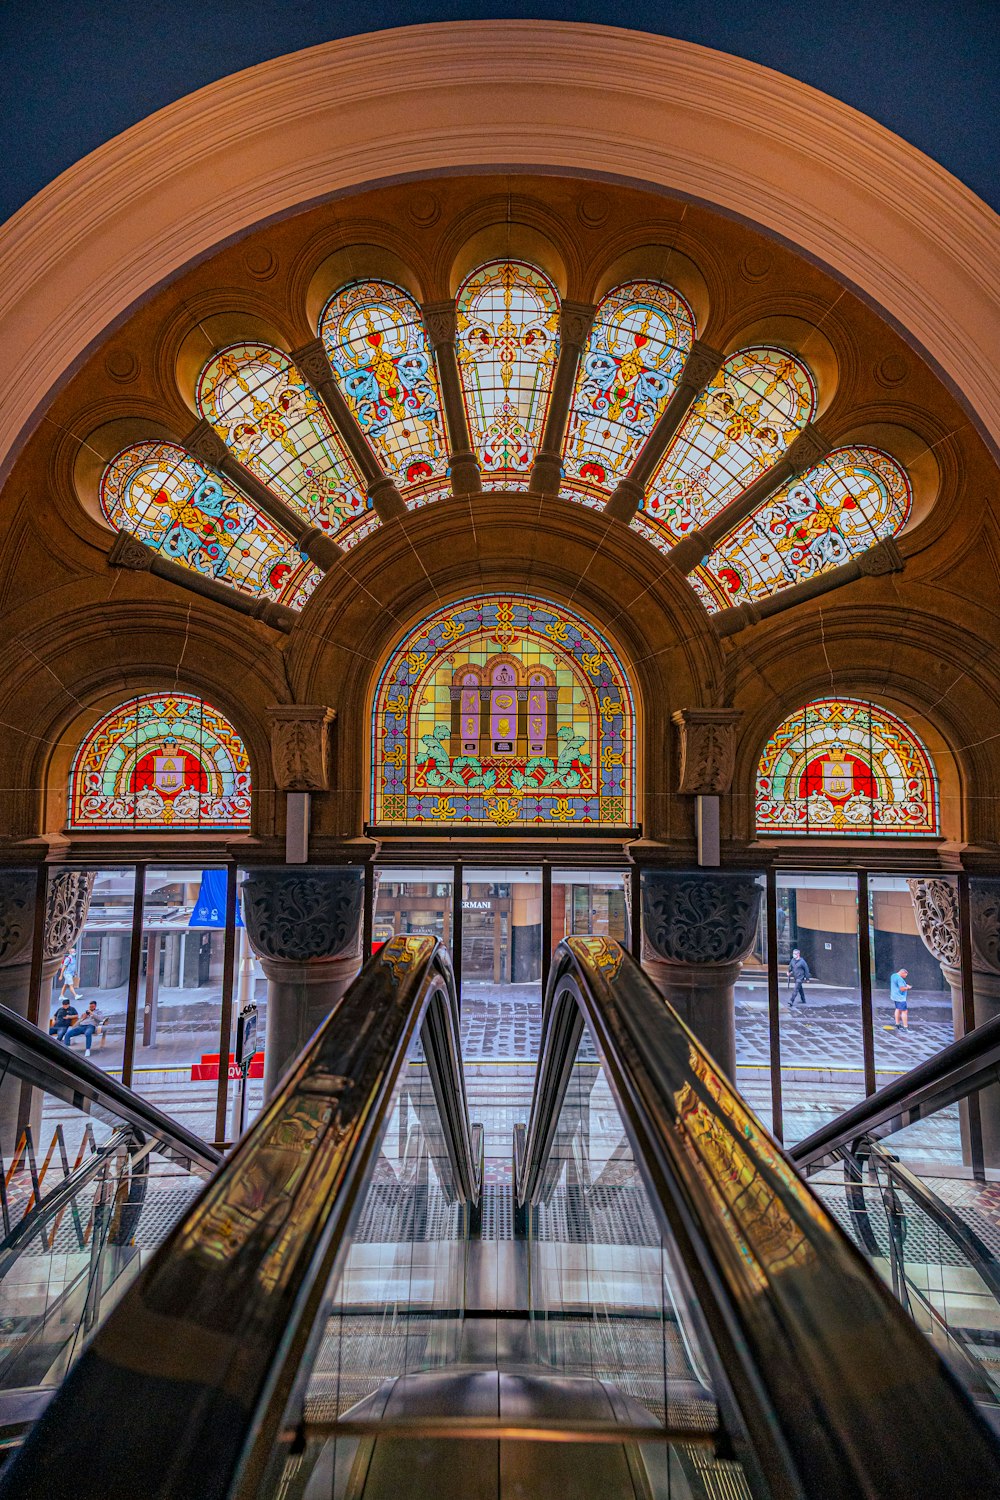 an escalator in a building with stained glass windows